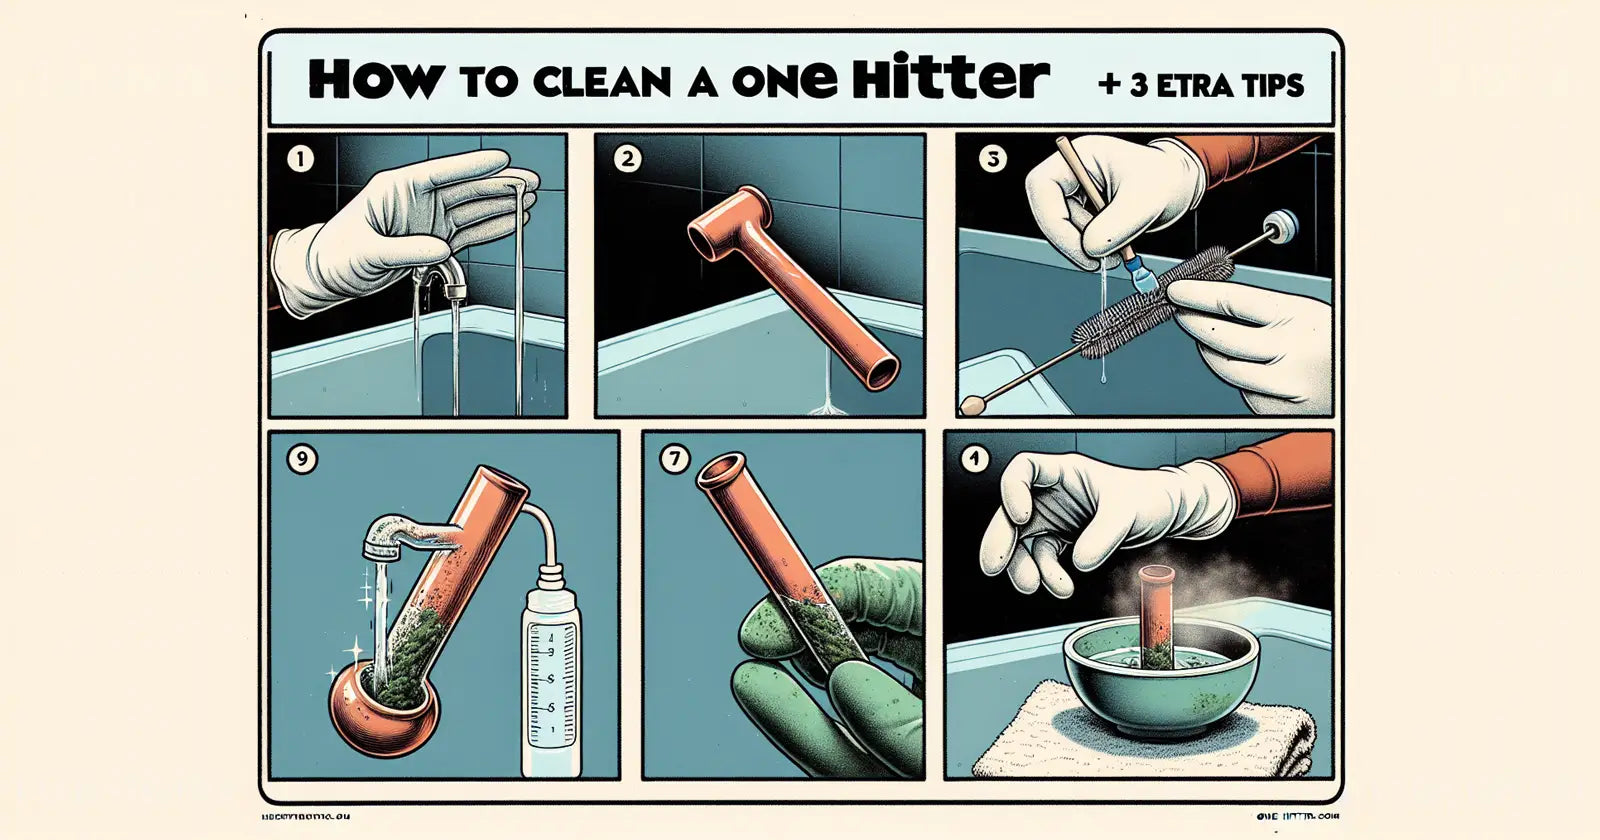 How to clean a one hitter